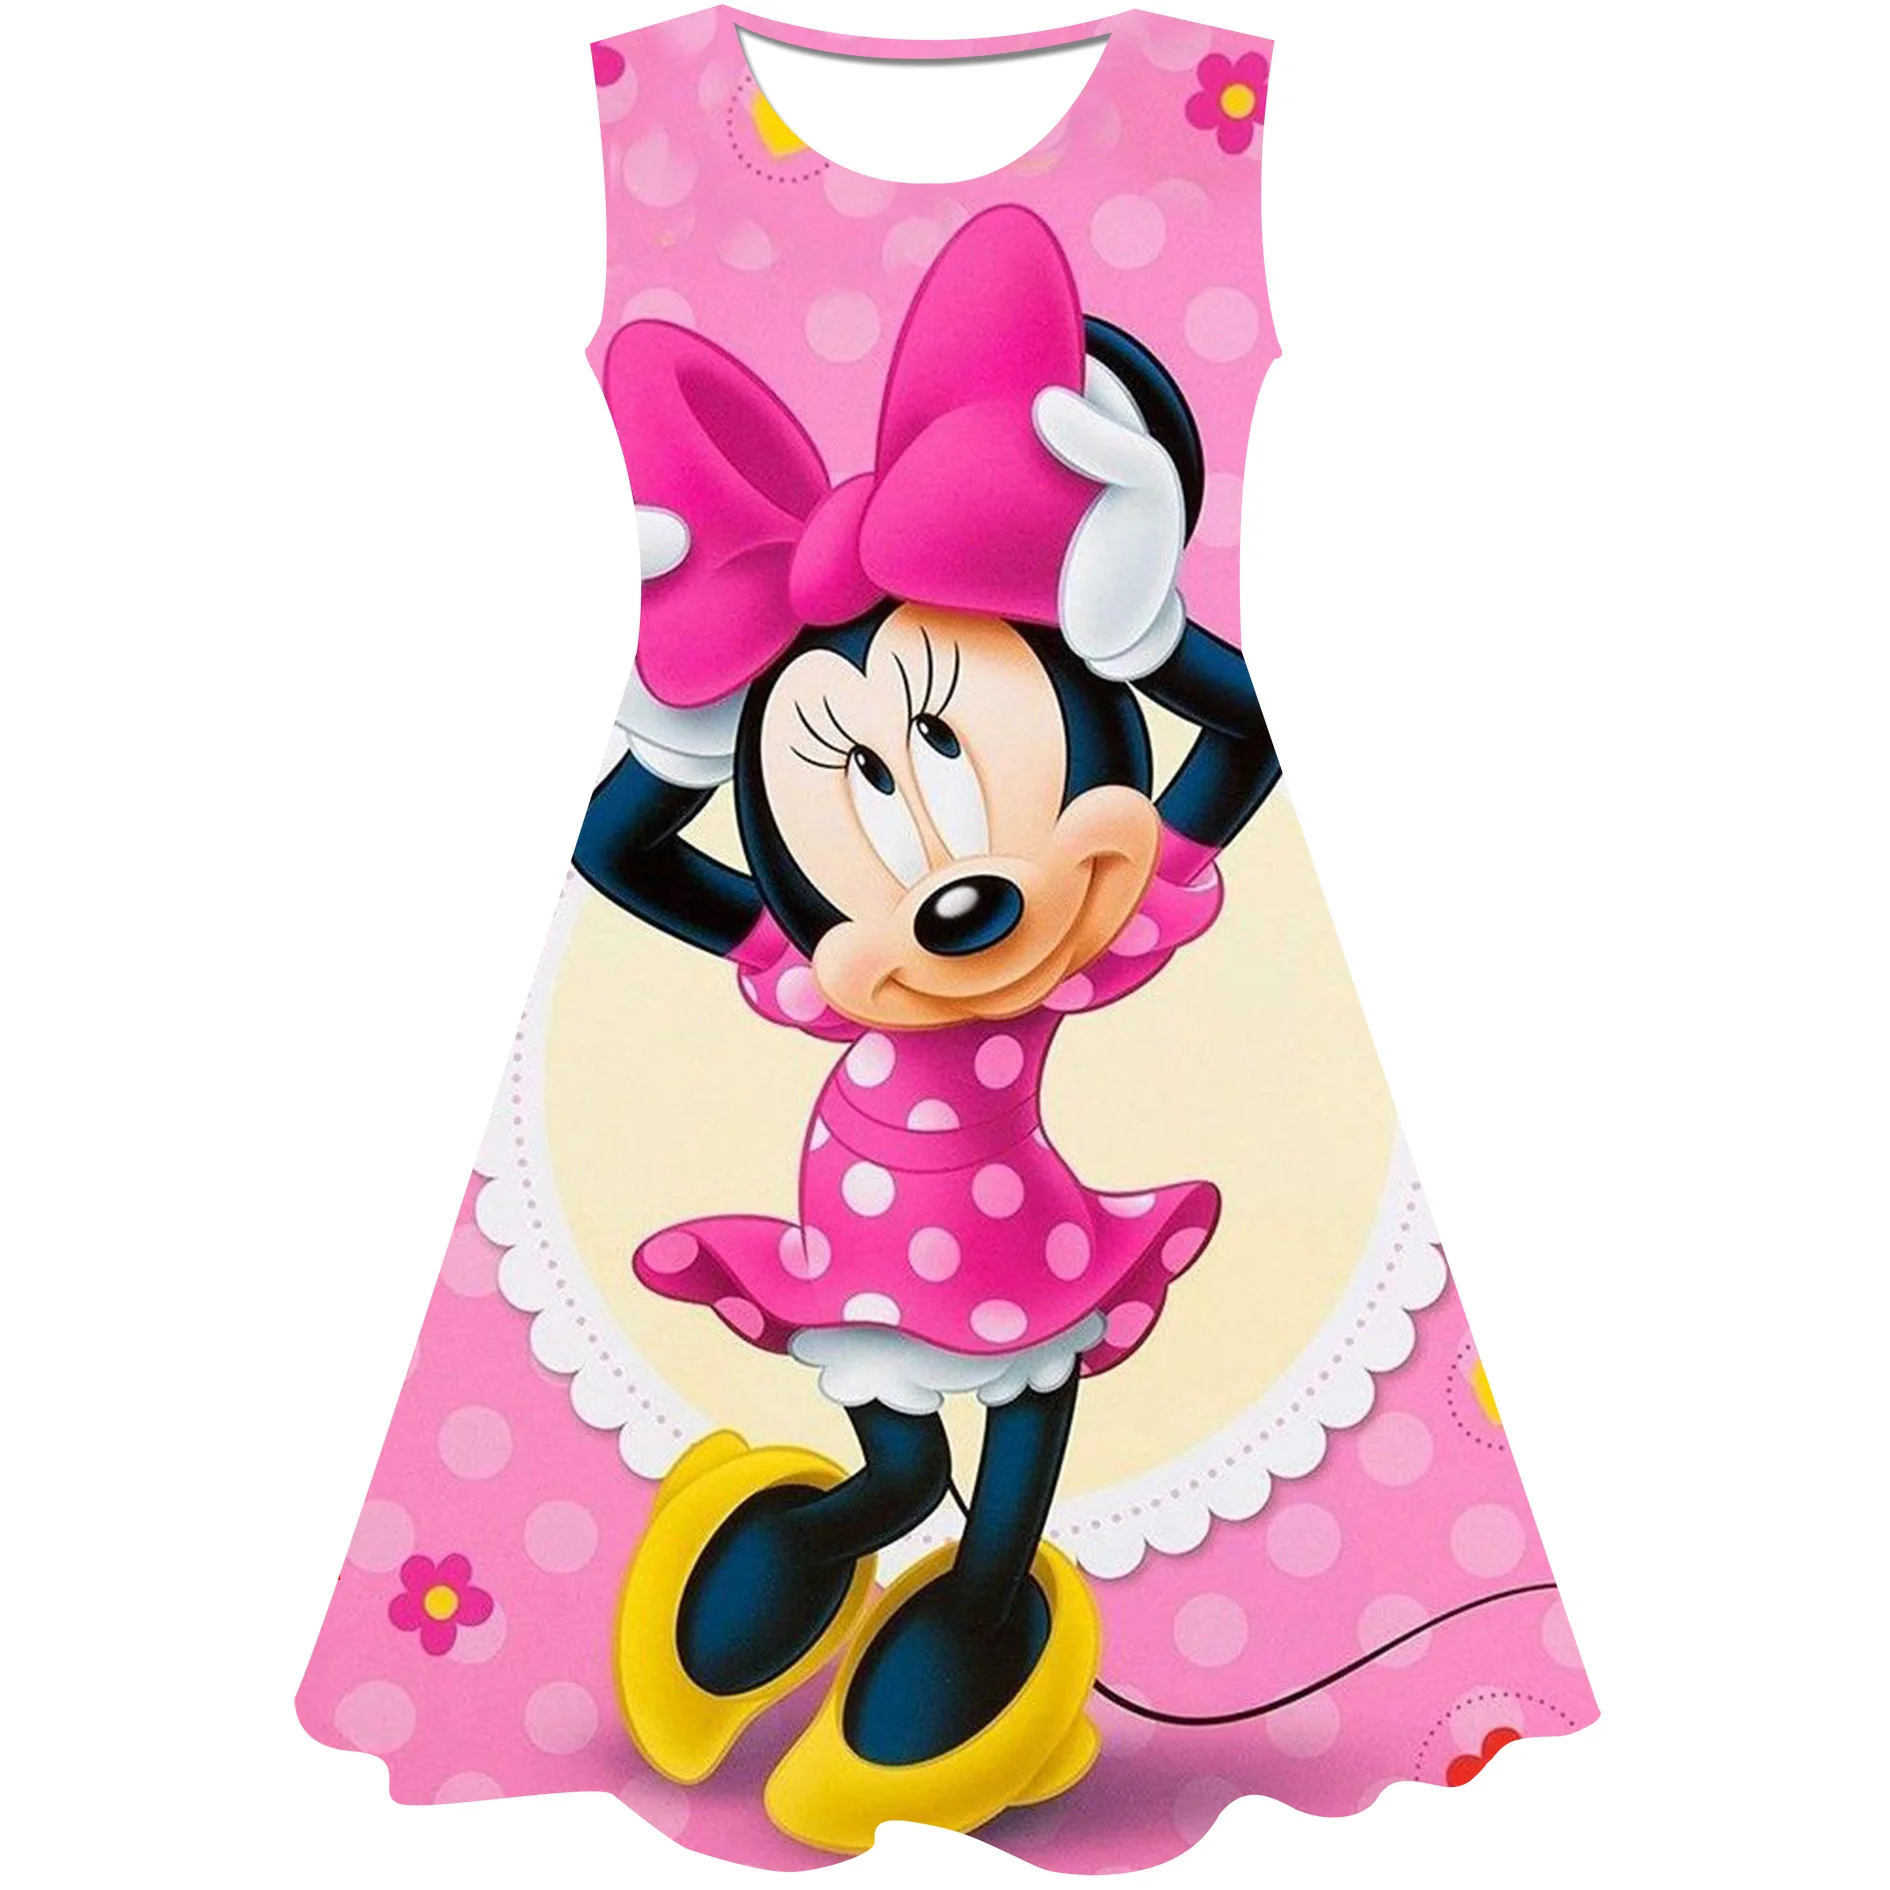 

Disney Minnie Mickey Mouse 3D Print Skirt for Girls,Female Child Minnie Mickey Dress Charming Children's Dress for Girl 1-10Year